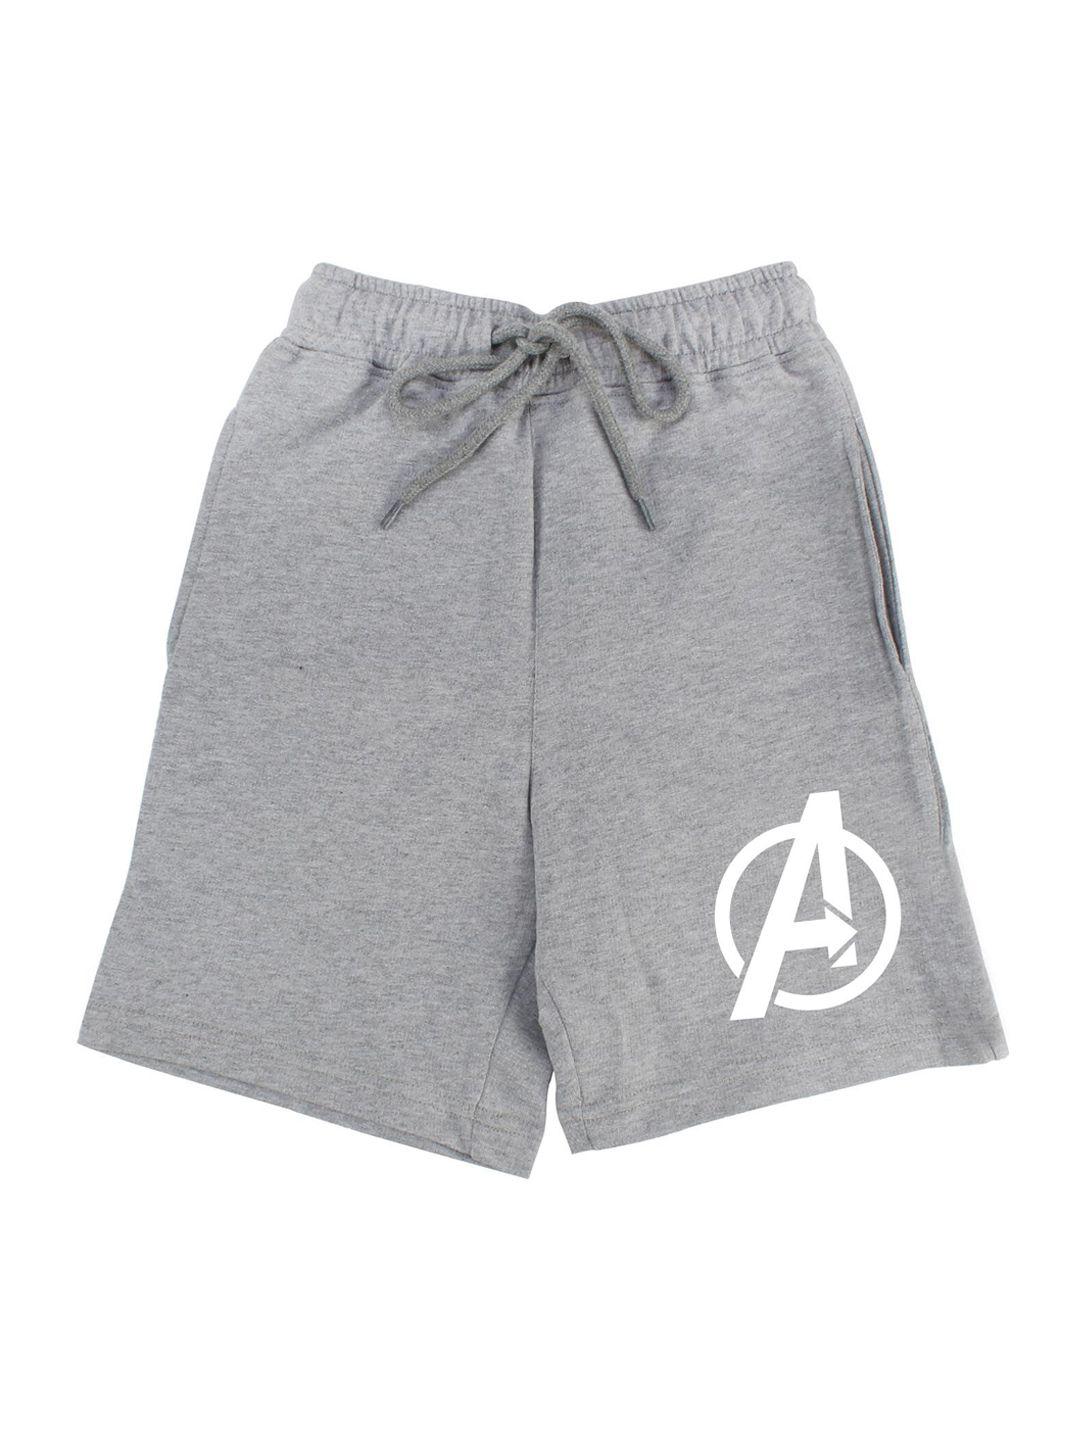 marvel-by-wear-your-mind-boys-grey-avengers-shorts